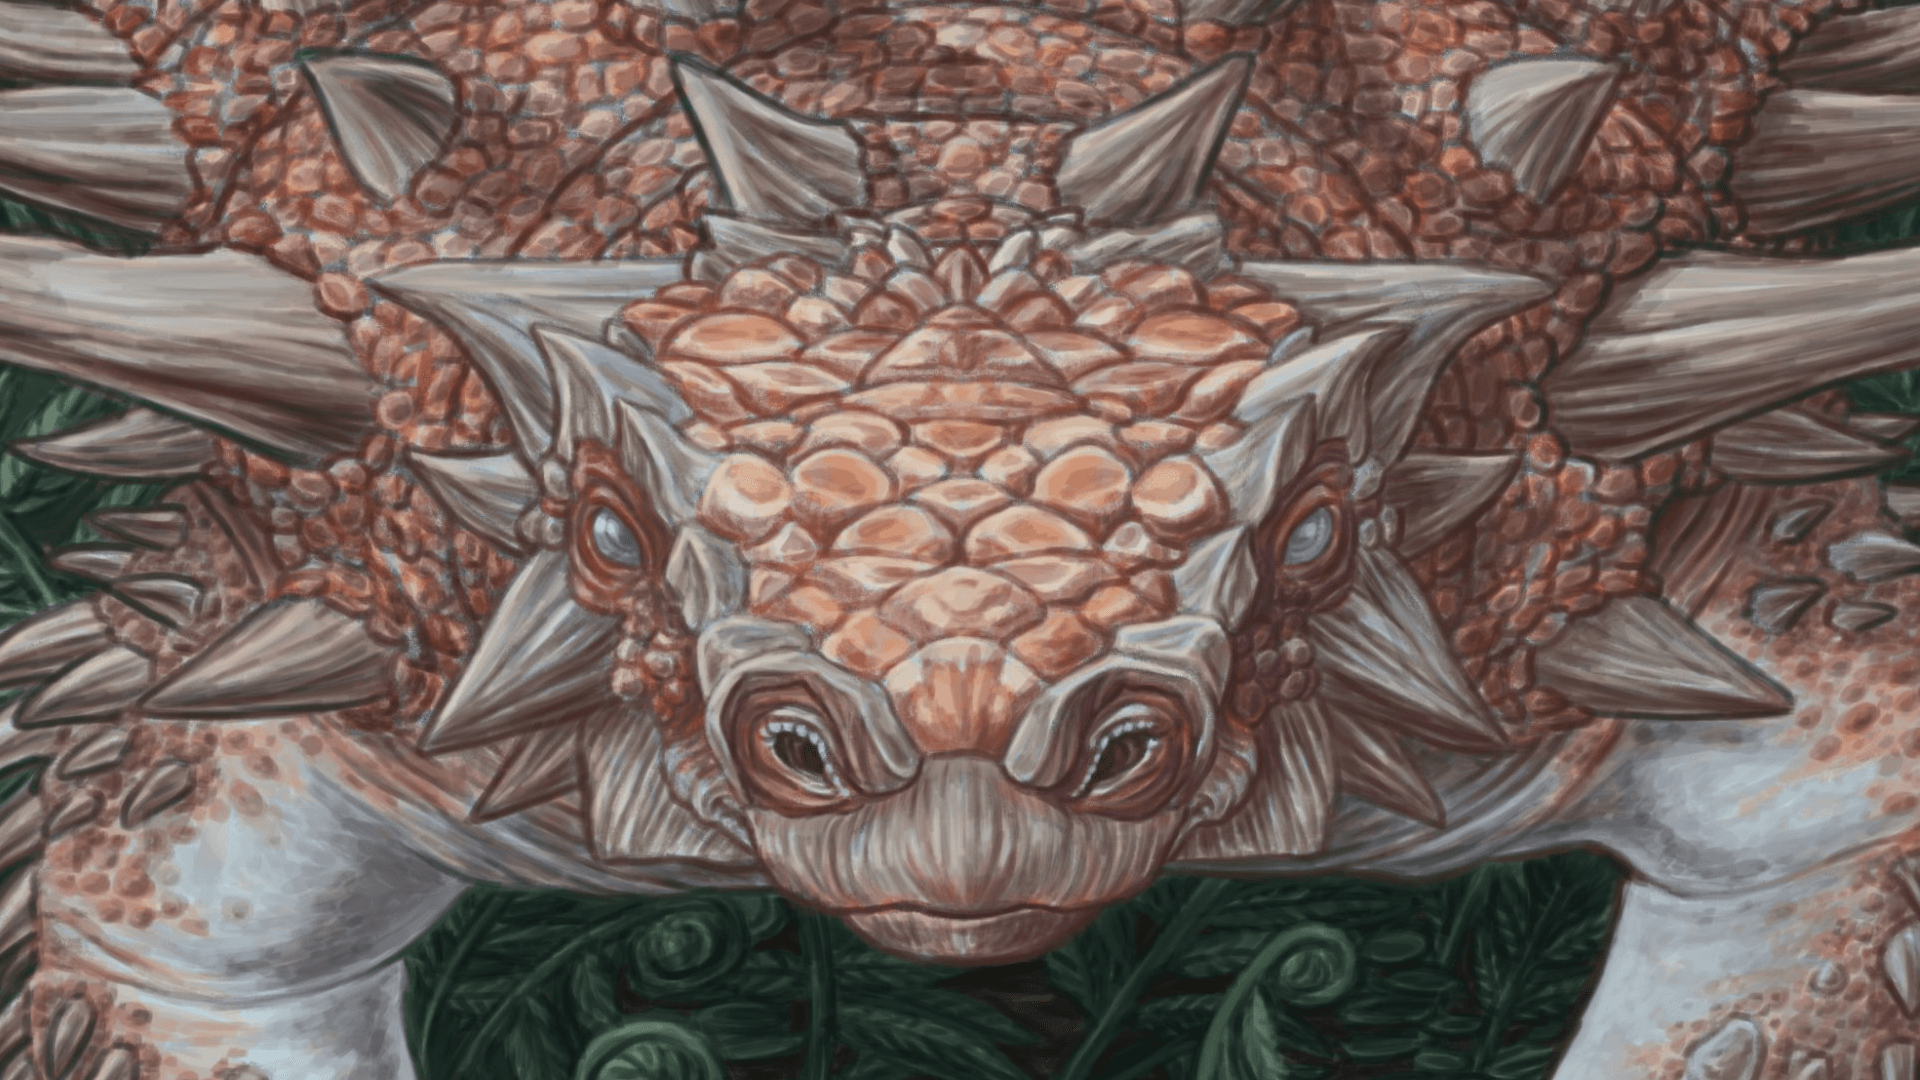 A close-up detail of the head of Sean Closson's Zuul crurivastator illustration